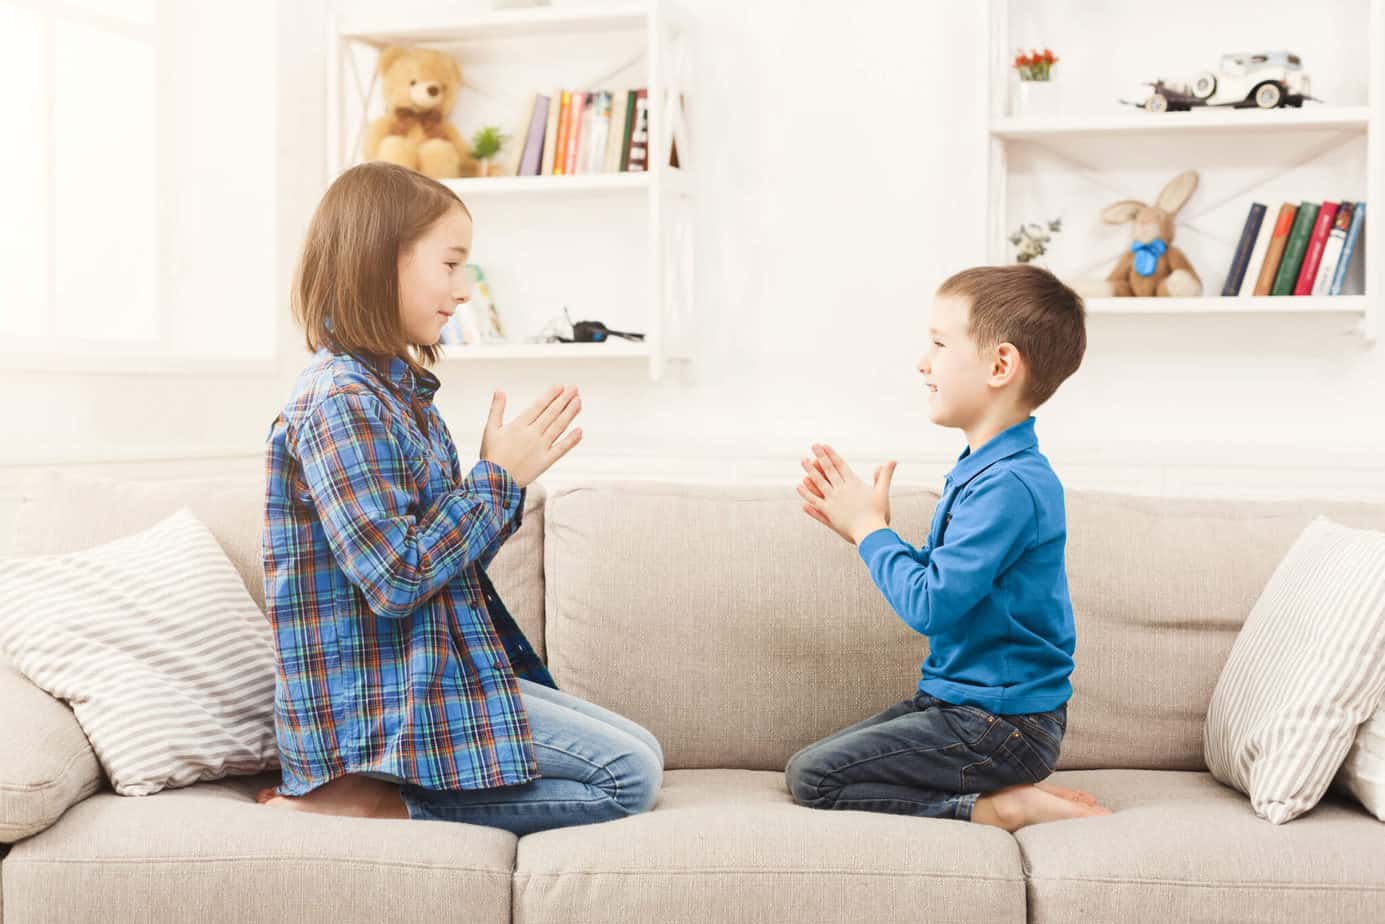 Quiet games to take anywhere with kids that don’t need prep or a lot supplies. Quiet activities and quiet games for kids to play when you’re in the car, in a waiting room or at home and need the kids to play independently.